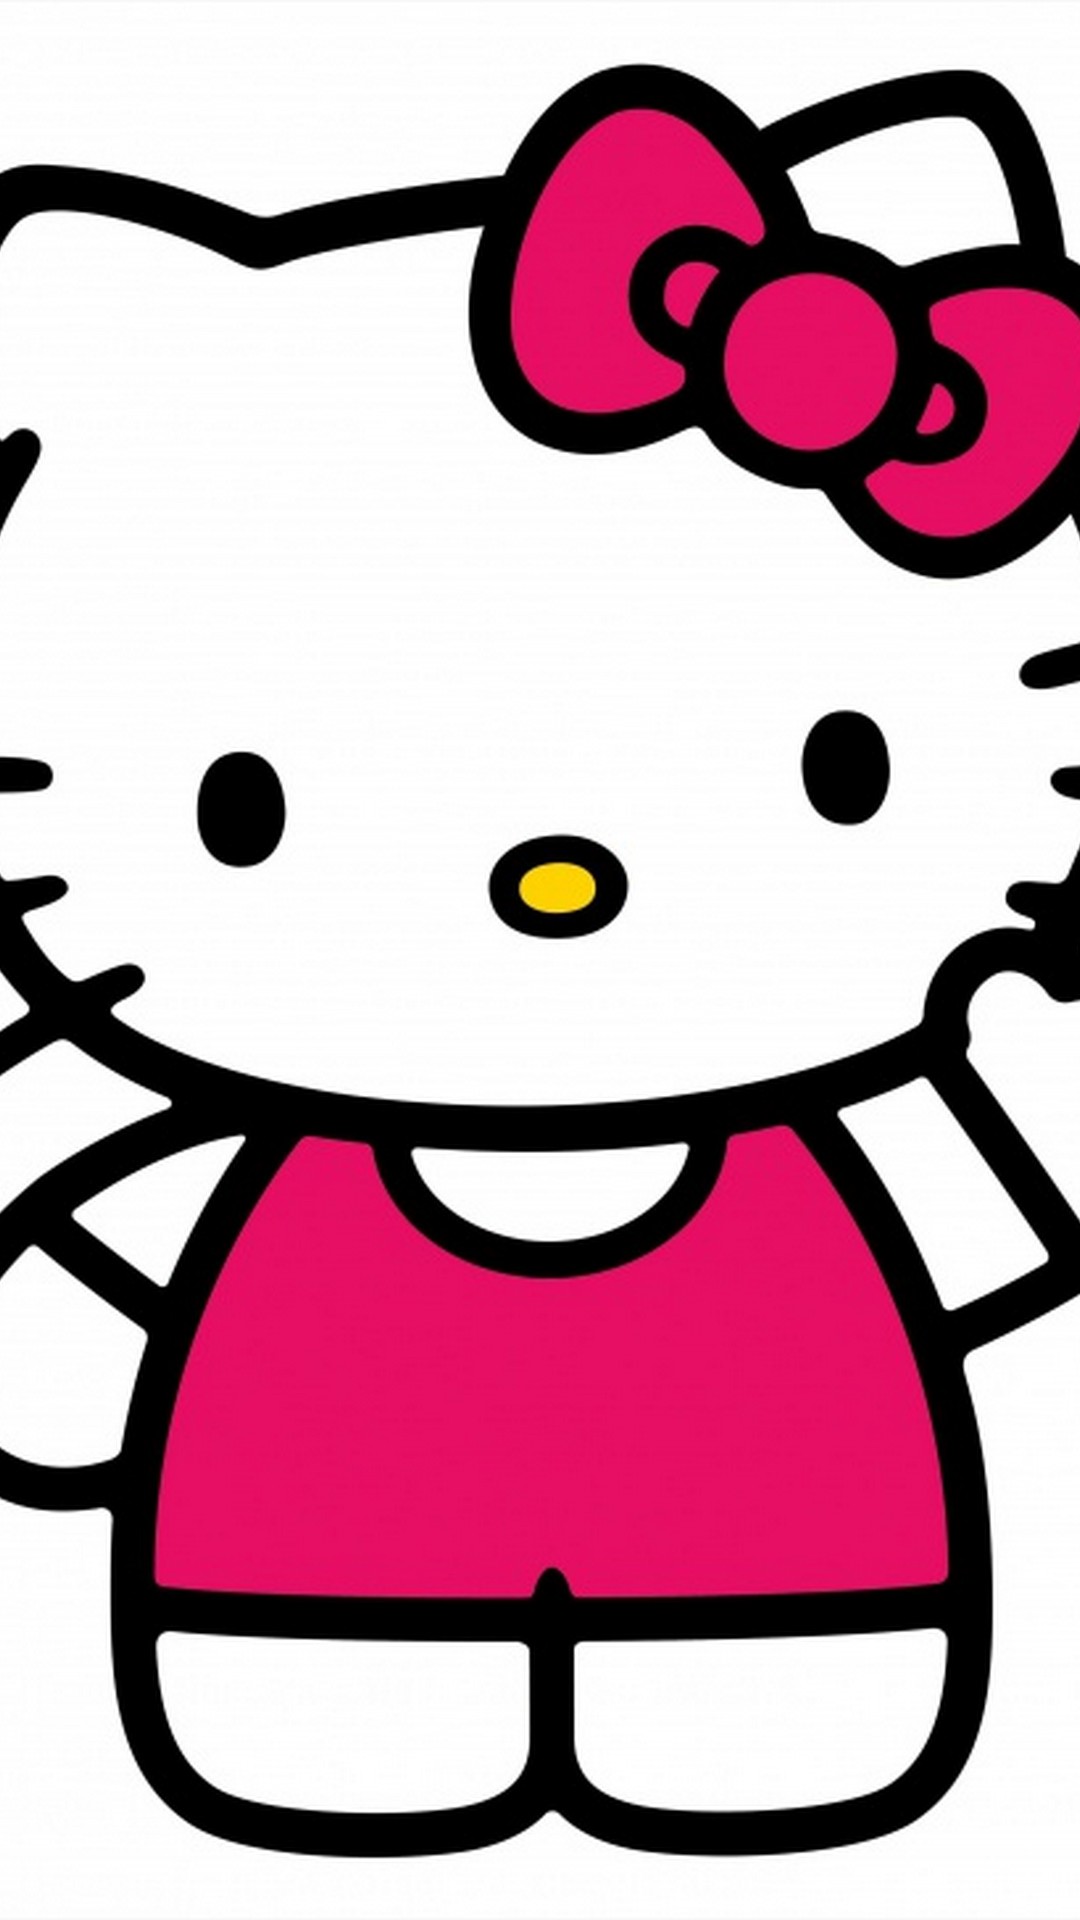 Sanrio Hello Kitty iPhone X Wallpaper with resolution 1080X1920 pixel. You can use this wallpaper as background for your desktop Computer Screensavers, Android or iPhone smartphones